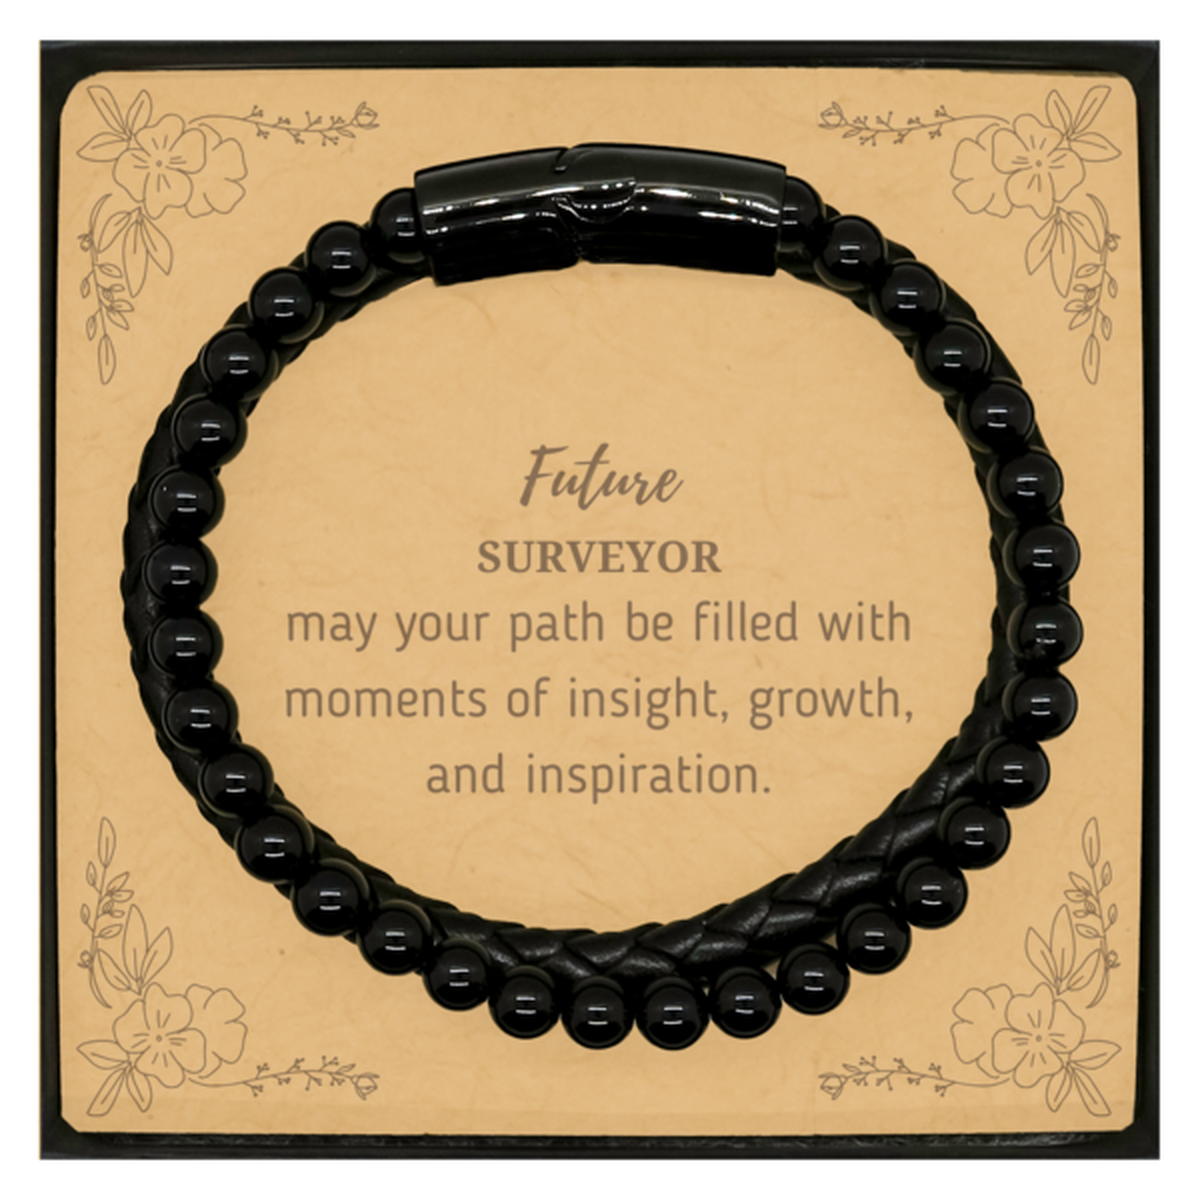 Future Surveyor Gifts, May your path be filled with moments of insight, Graduation Gifts for New Surveyor, Christmas Unique Stone Leather Bracelets For Men, Women, Friends